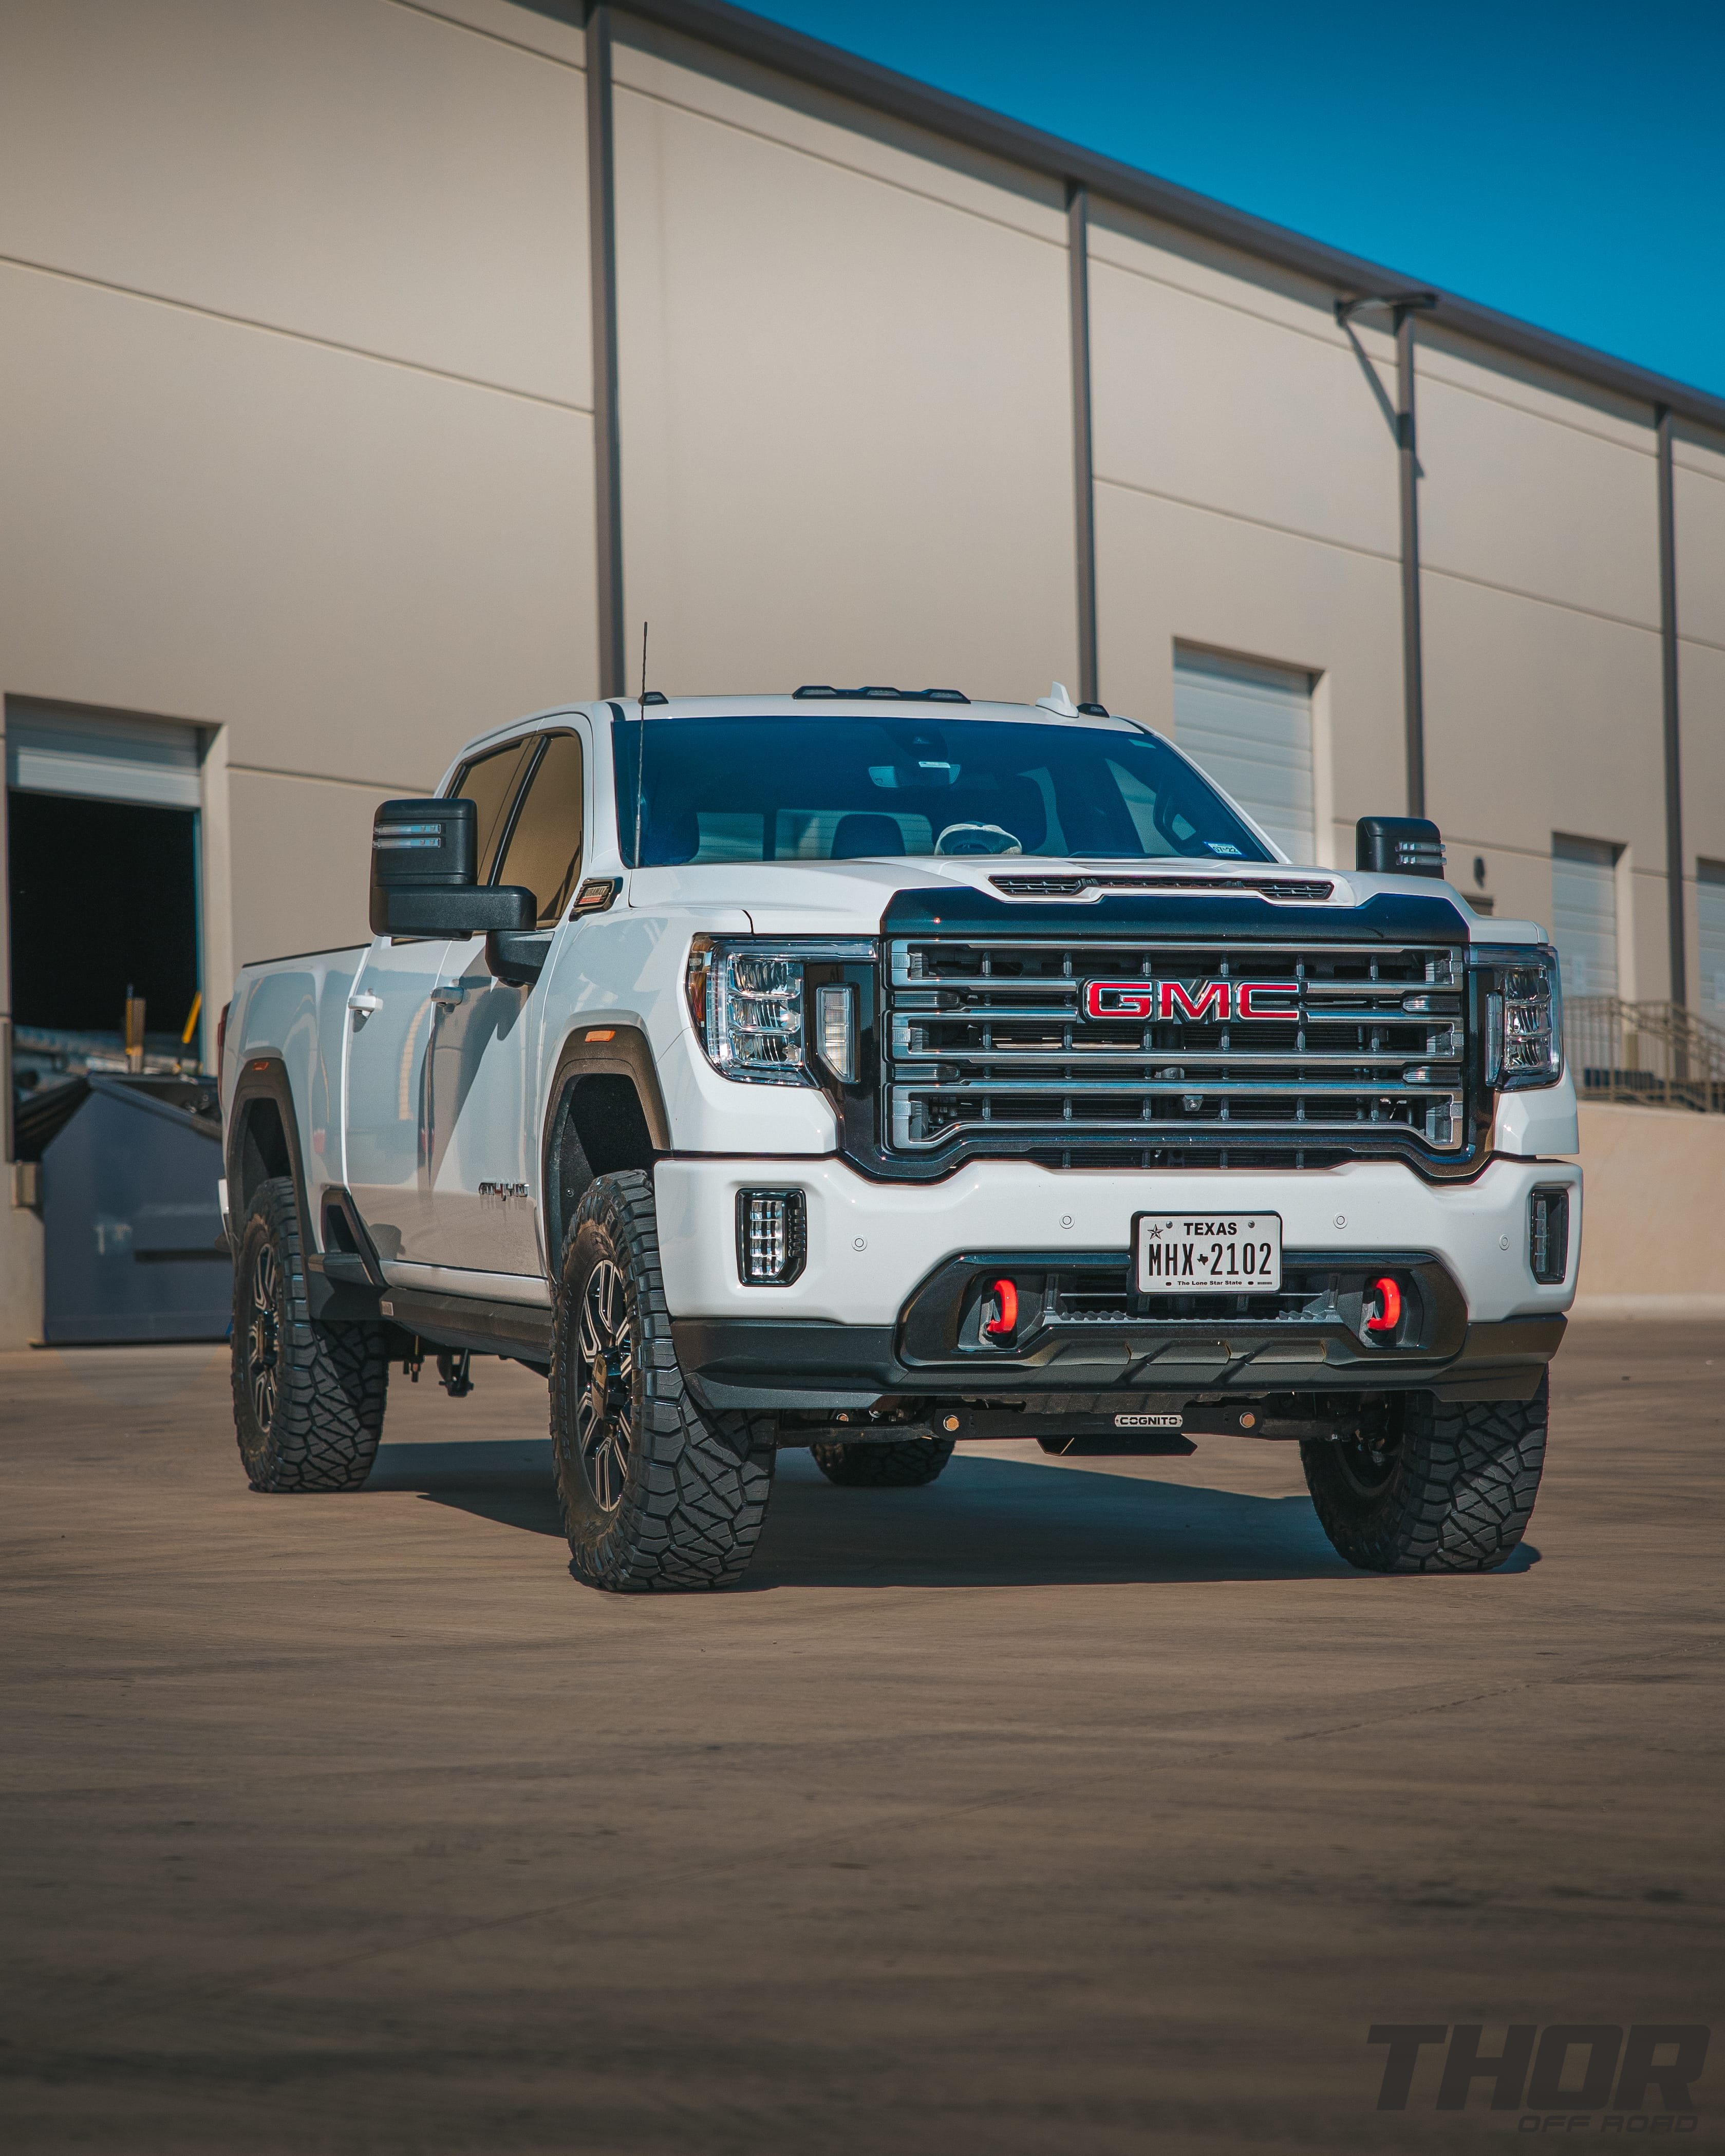 2020 GMC Sierra 2500 HD AT4 in White with 4" Cognito Suspension Kit with FOX Reservoirs, Amp Research Power Steps, 37x12.50R20 Nitto Ridge Grappler Tires